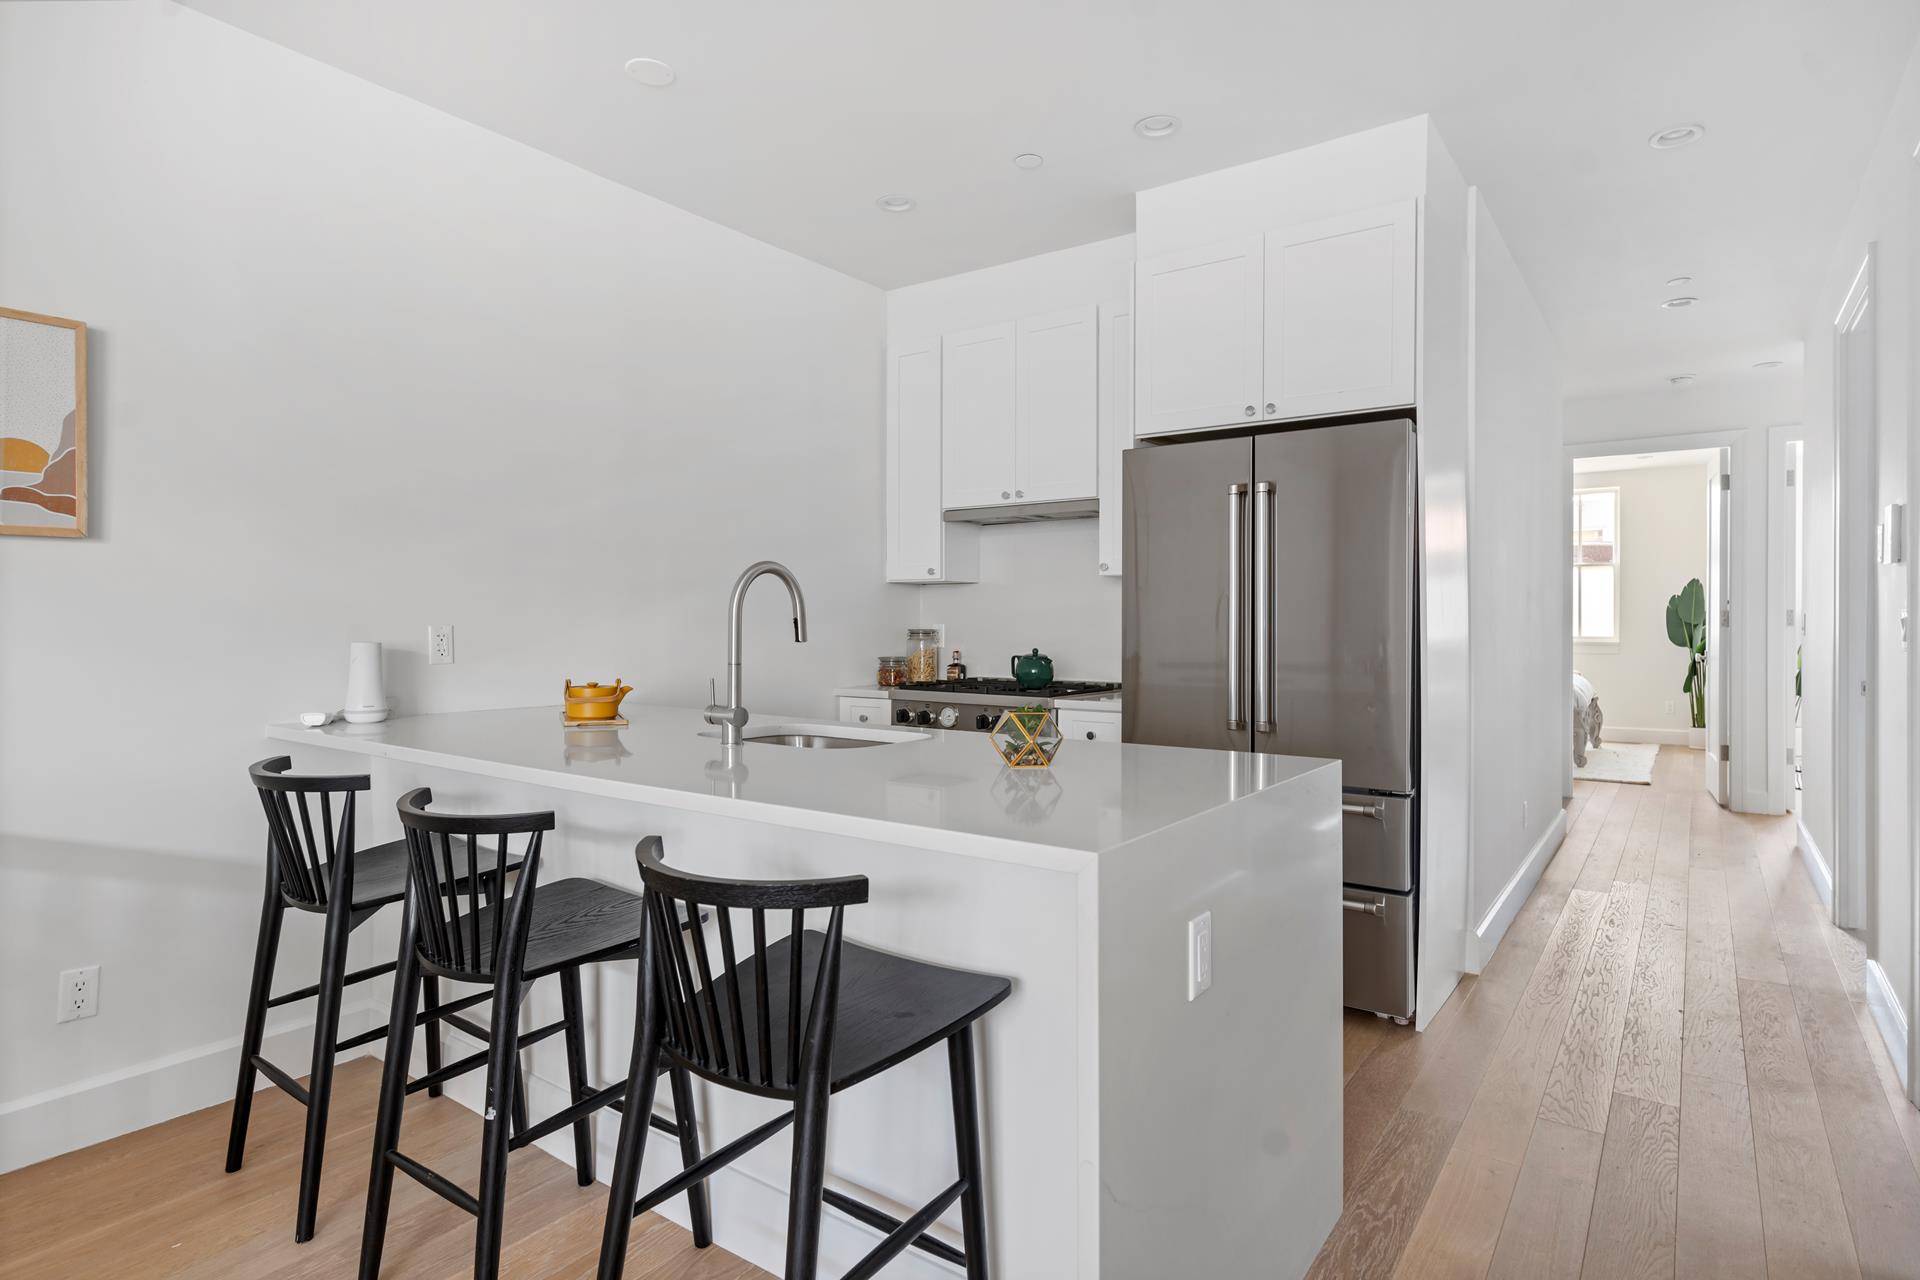 Welcome to 182 Minna Street A newly built, boutique condominium comprised of six generously sized two bedroom 2BR and three bedroom 3BR residences.